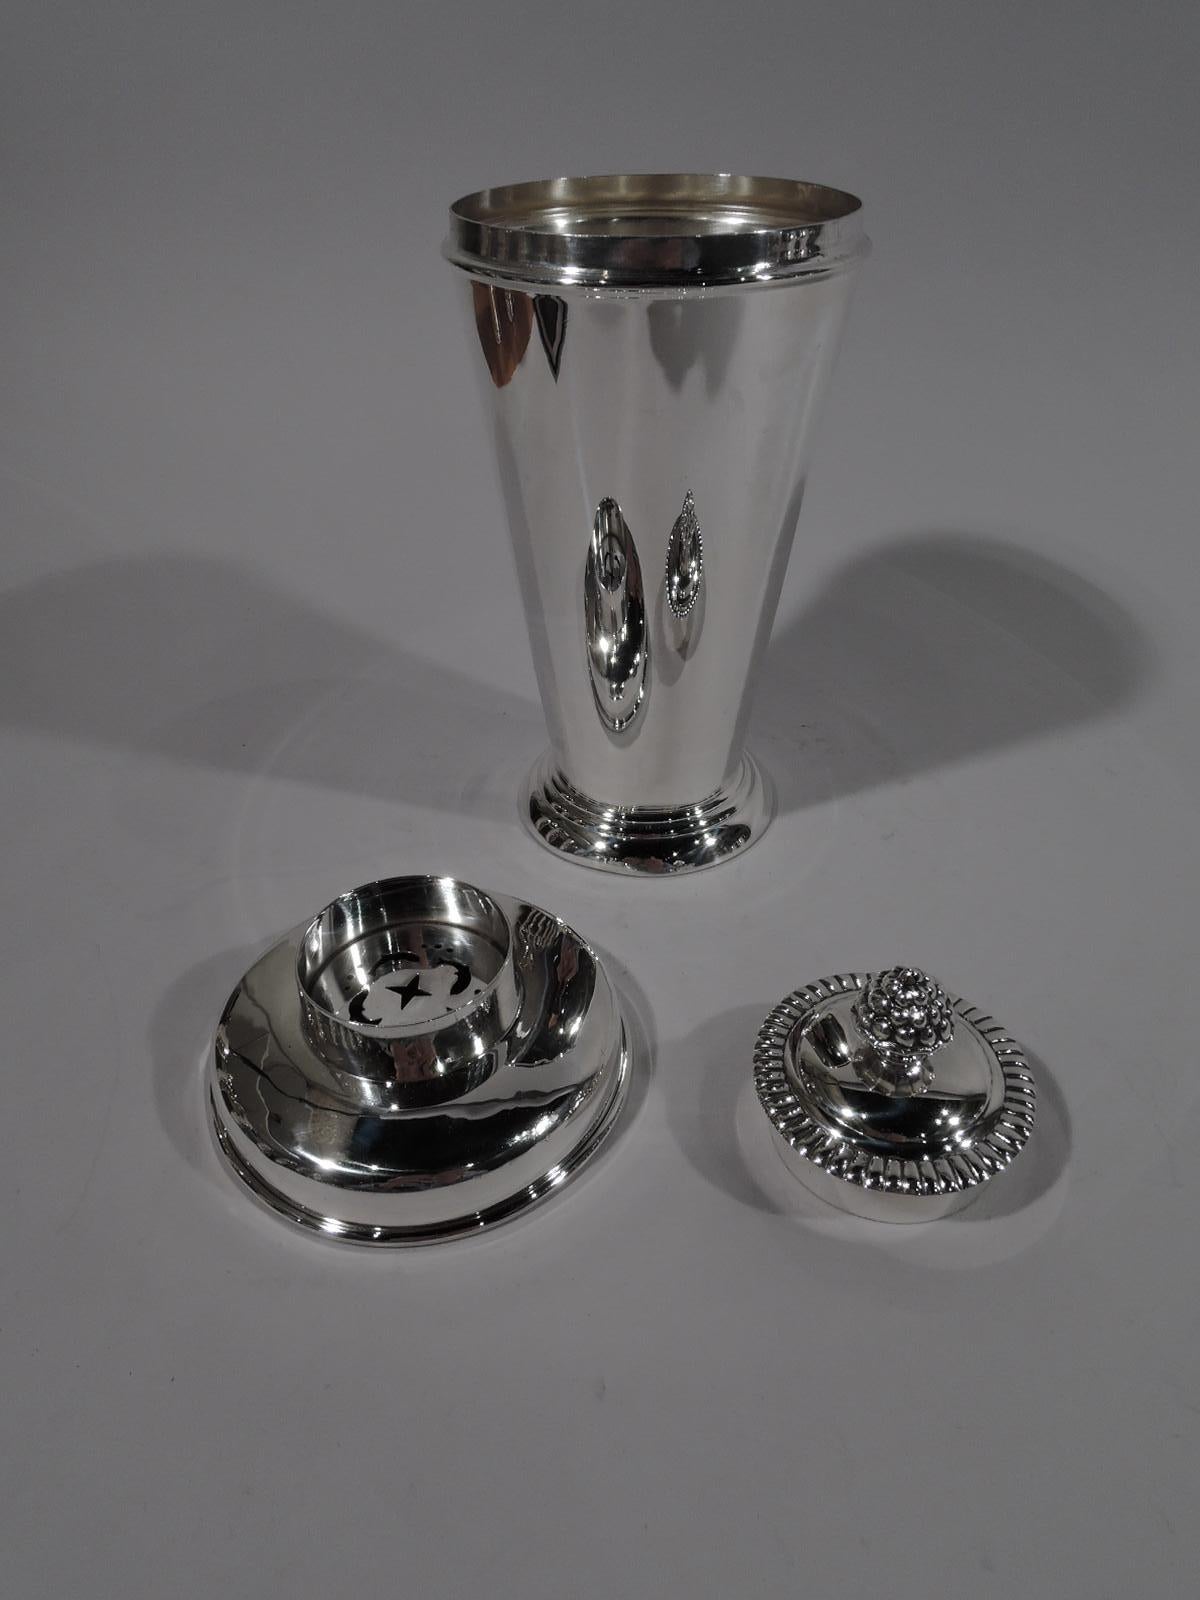 Scandinavian Modern sterling silver cocktail Shaker. Made by Kristian M. Hestenes in Bergen, Norway, circa 1950. Straight and tapering cup on spread and stepped foot. Detachable top with curved shoulder and short neck with built-in strainer. Cover